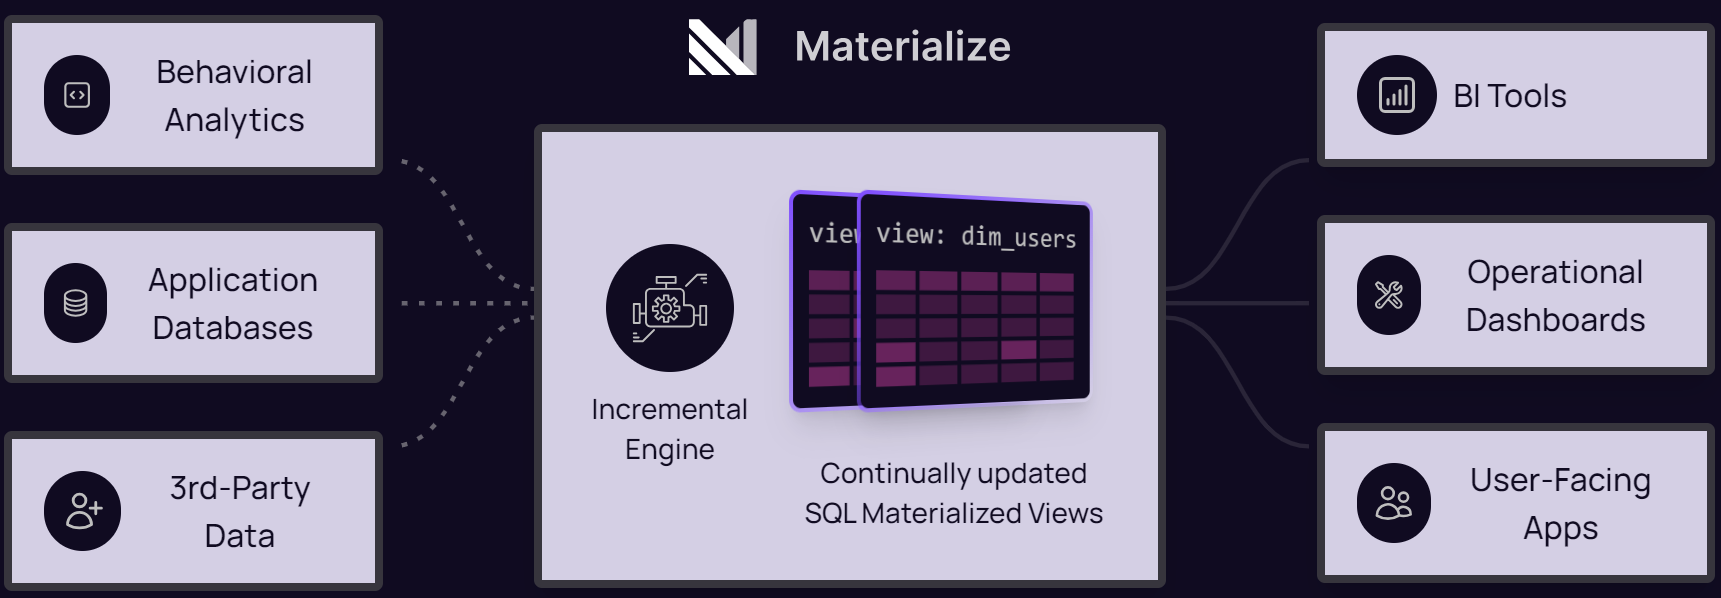 Materialize overview